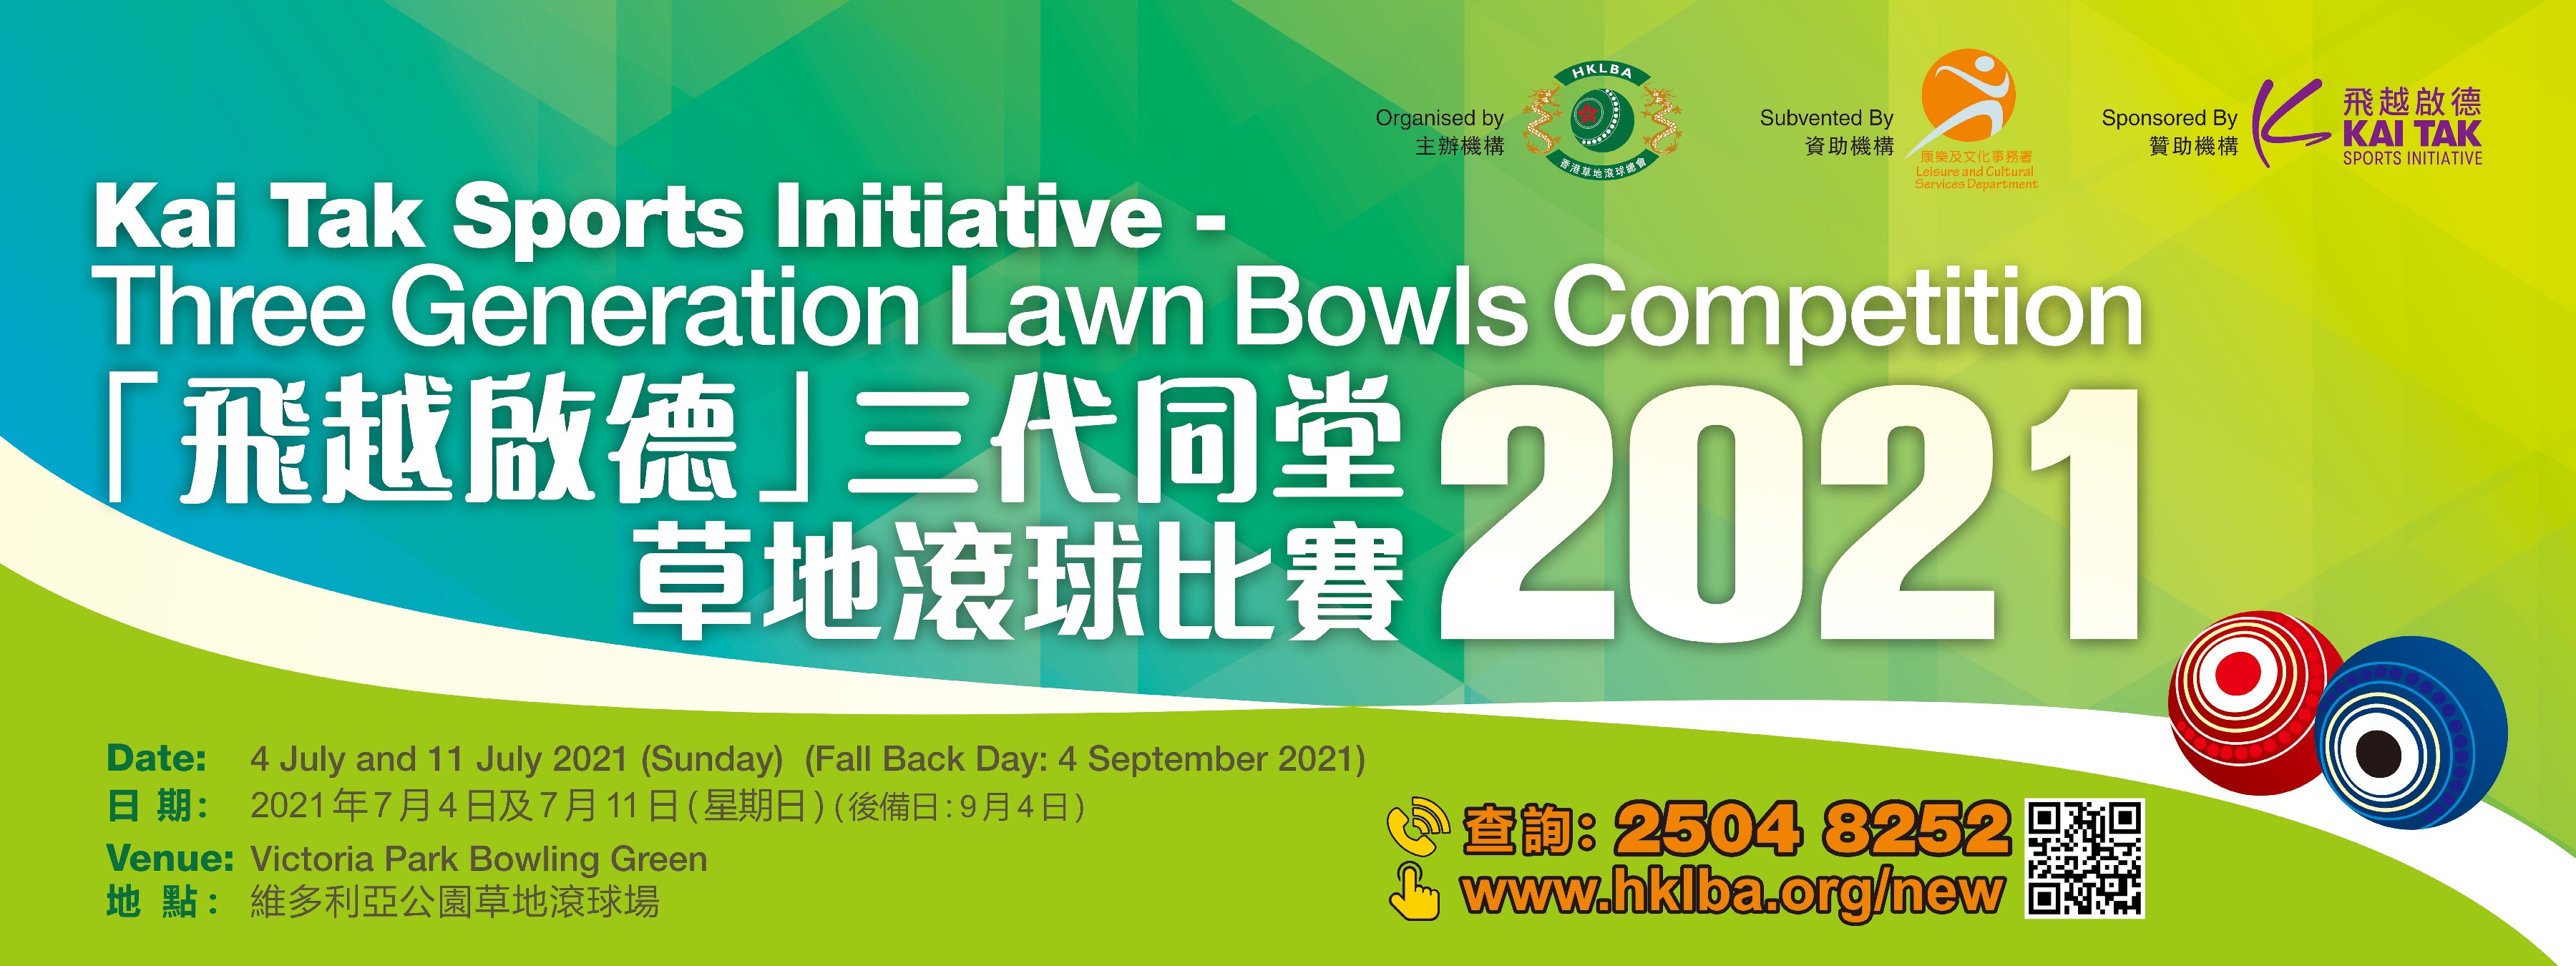 [New Event Update]KTSI Three Generation Lawn Bowls Competition 2021-Start Entry!